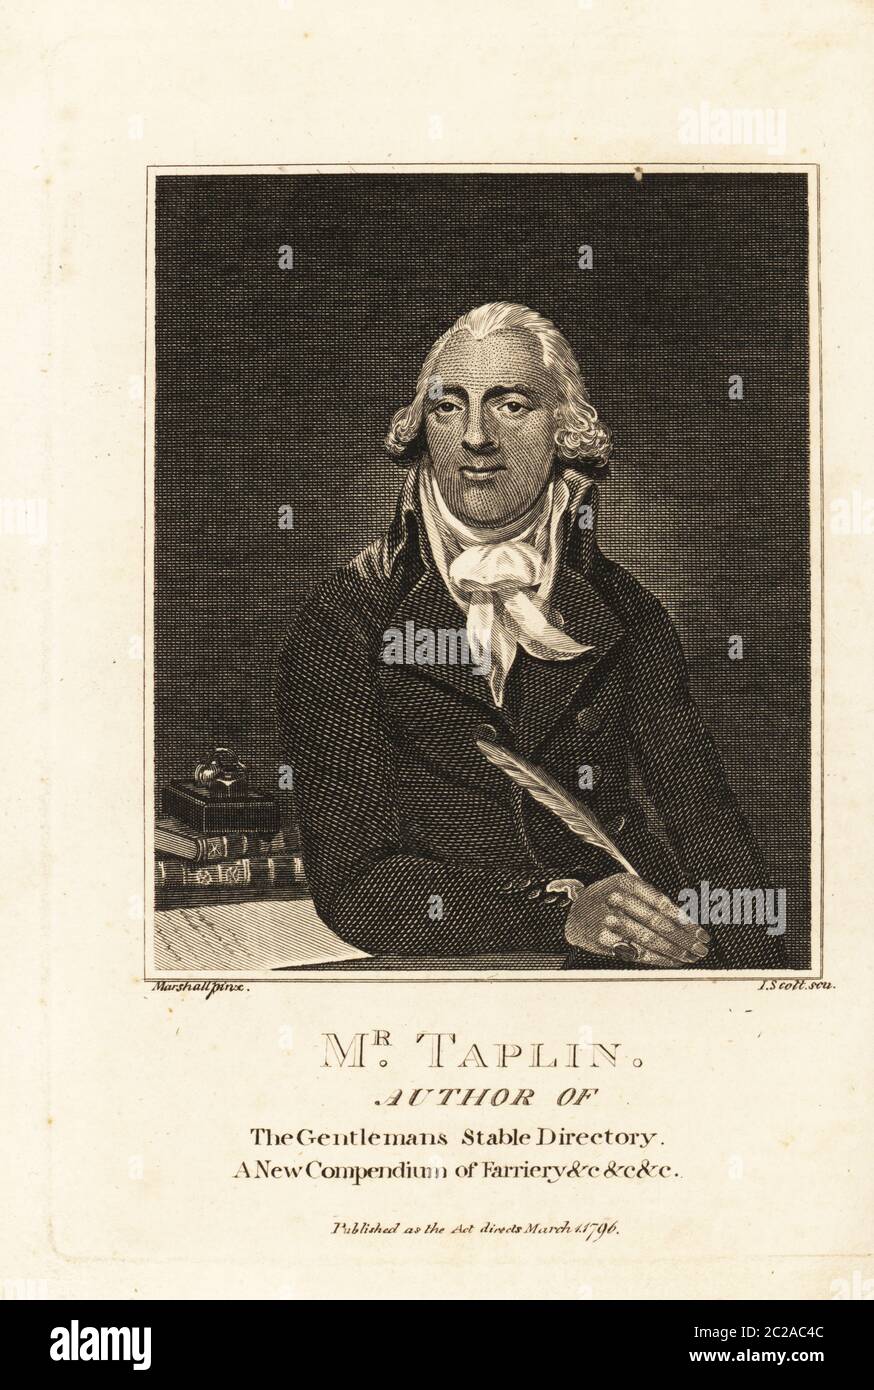 Portrait of William Taplin, author of The Gentleman’s Stable Directory, A New Compendium of Farriery, etc.  Taplin wrote about  equine veterinary medicine for the hunt, track and the road, 1740-1807. Copperplate engraving by J. Scott after a painting by Benjamin Marshall from The Sporting Magazine, or Monthly Calendar of the Transactions of the Turf and the Chace, John Wheble, London, 1796. Stock Photo